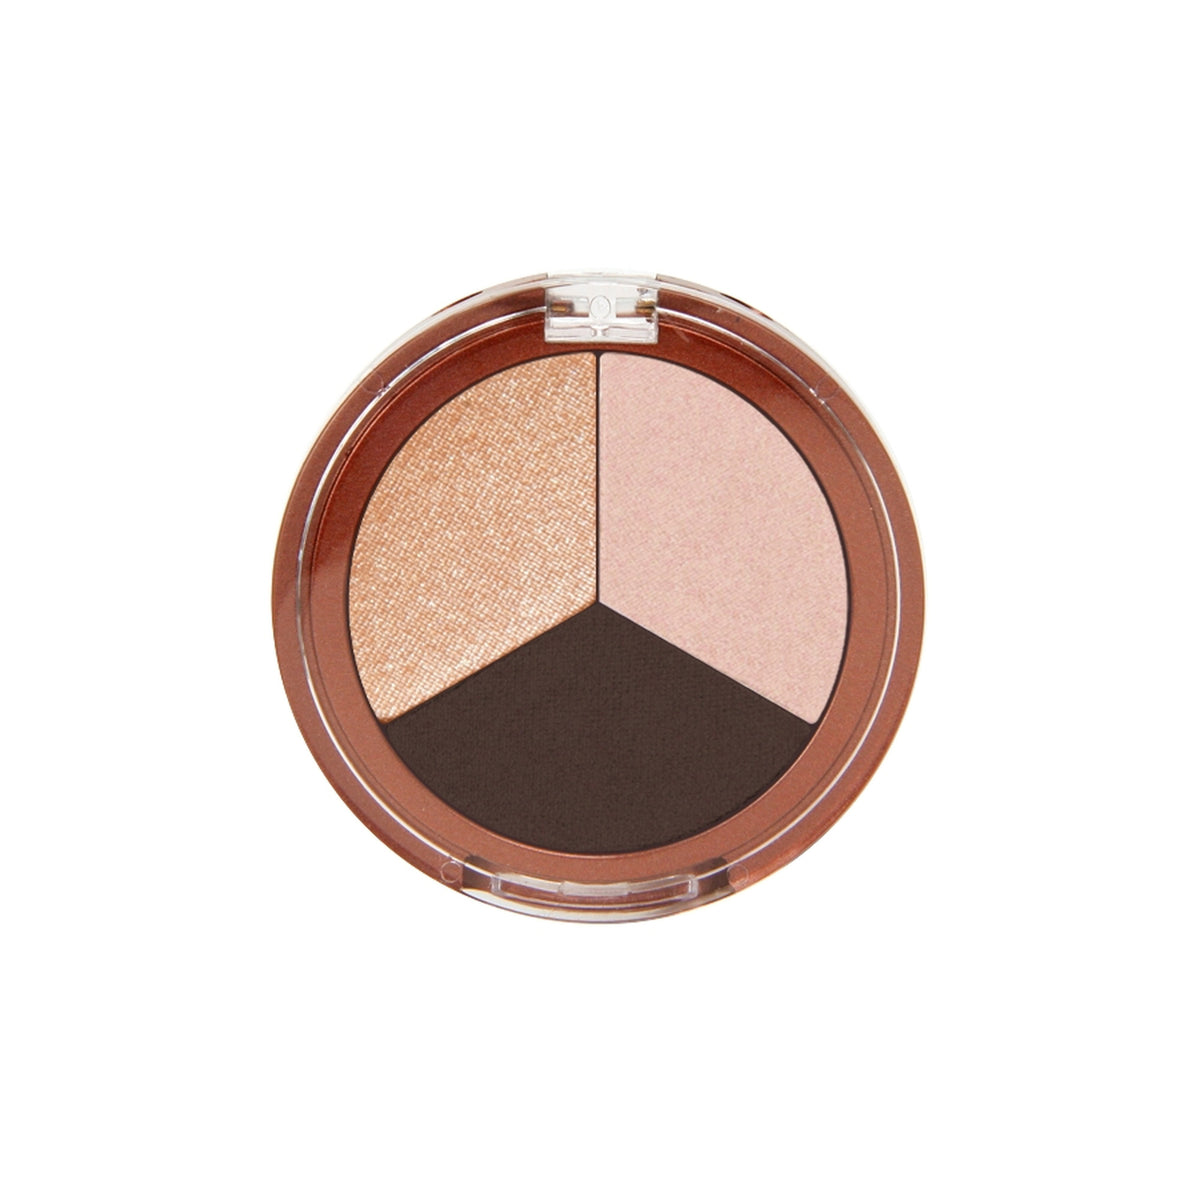 Mineral Fusion - Eye Shadow Trio - Espresso Gold - ProCare Outlet by Mineral Fusion